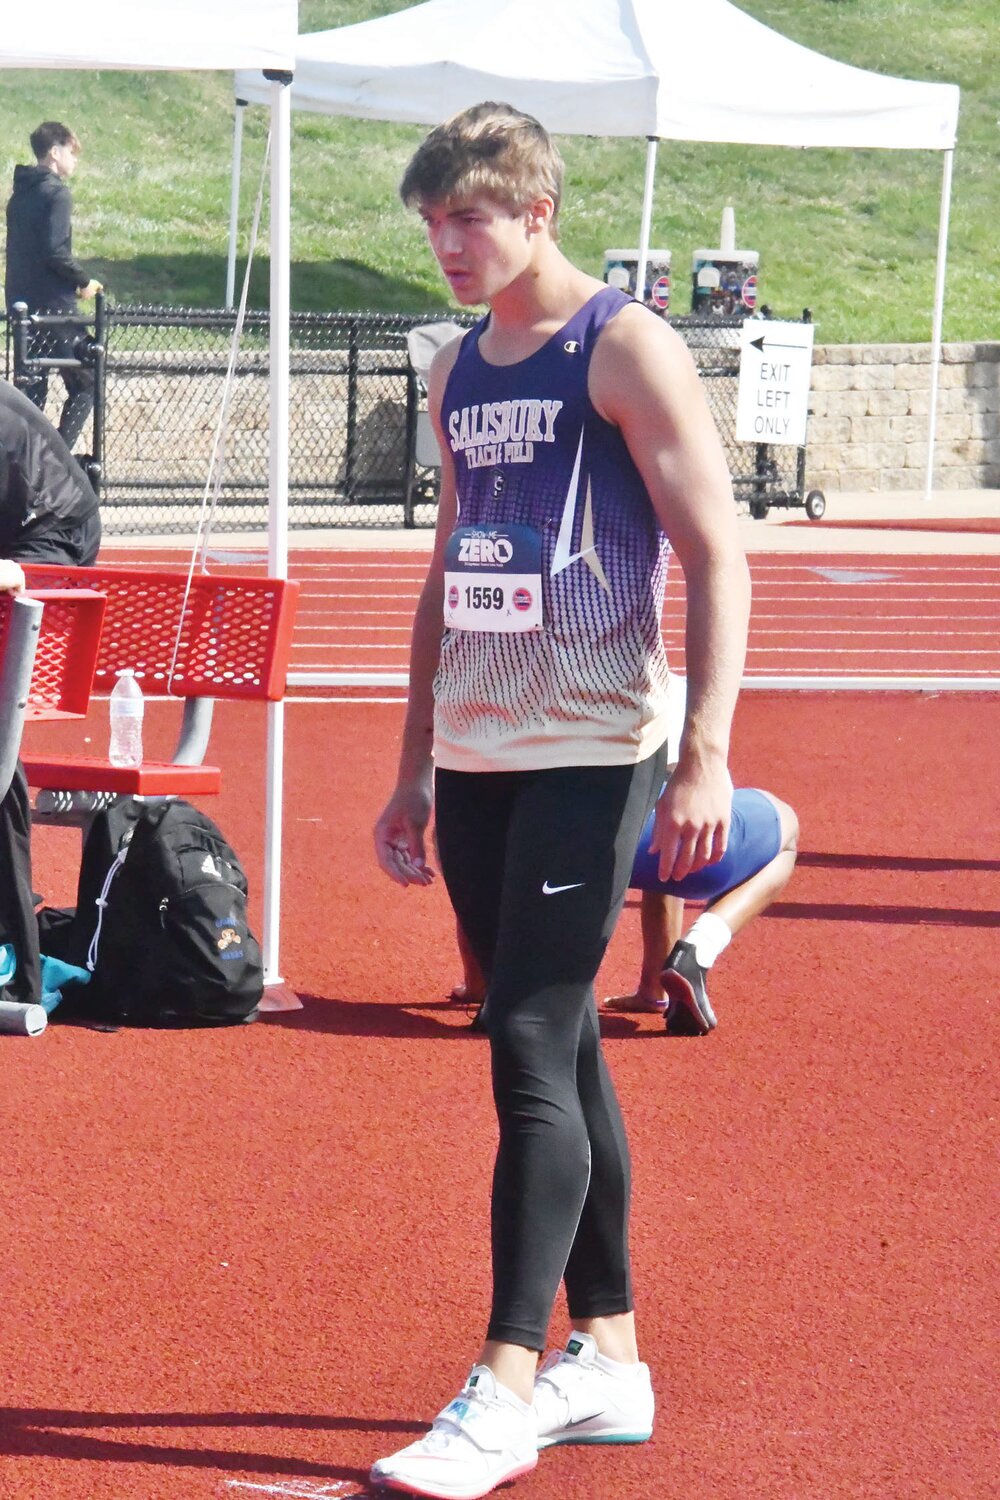 Salisbury's Cooper Francis gets his steps down before a high jump attempt on the morning of Saturday, May 20, at the Class 2 state meet in Jefferson City.